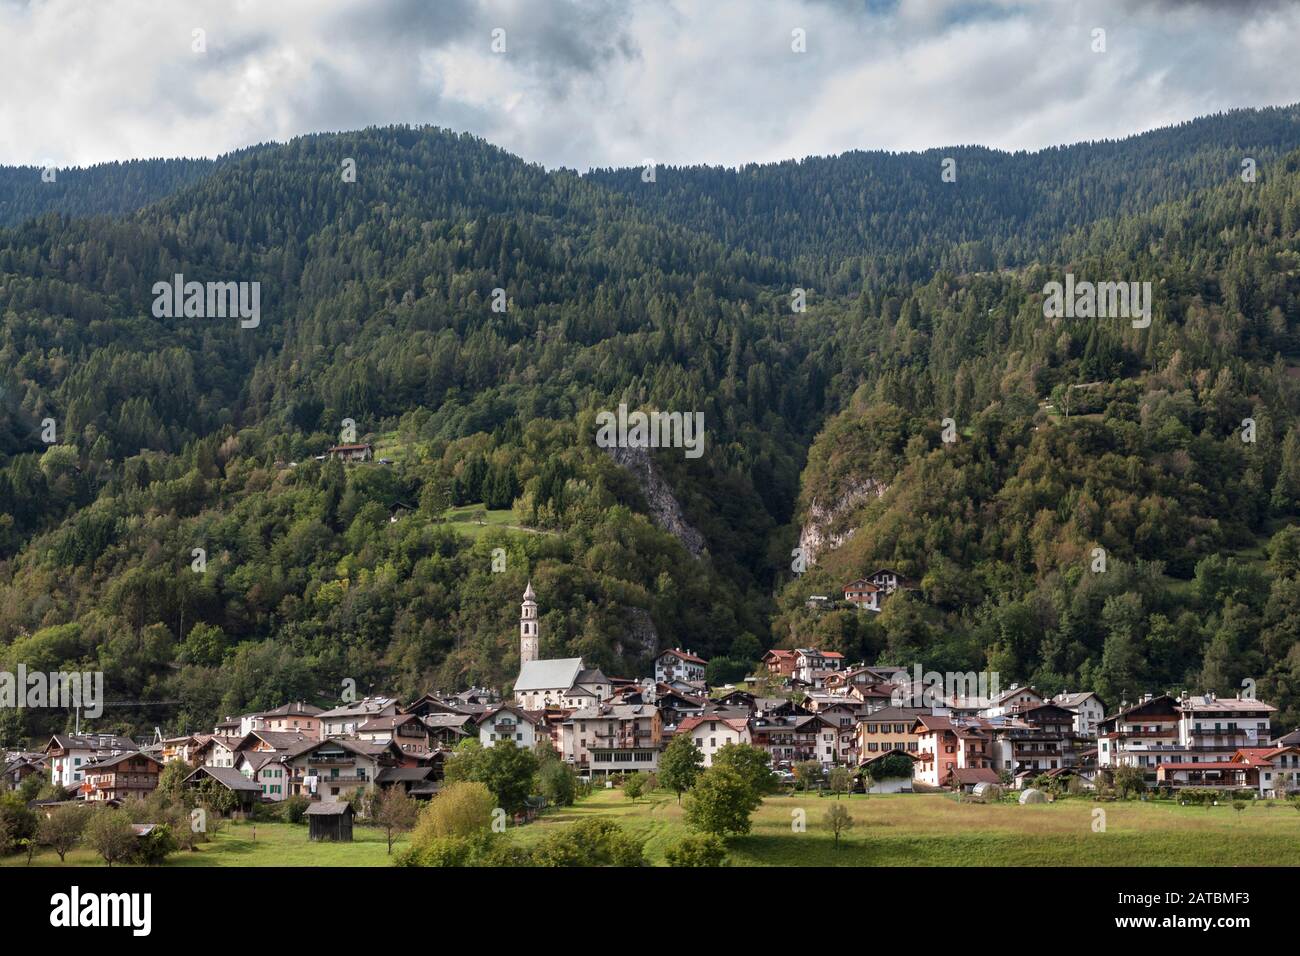 Imer, in the foothills of the Dolomites, Trentino-Alto Adige, Italy Stock Photo